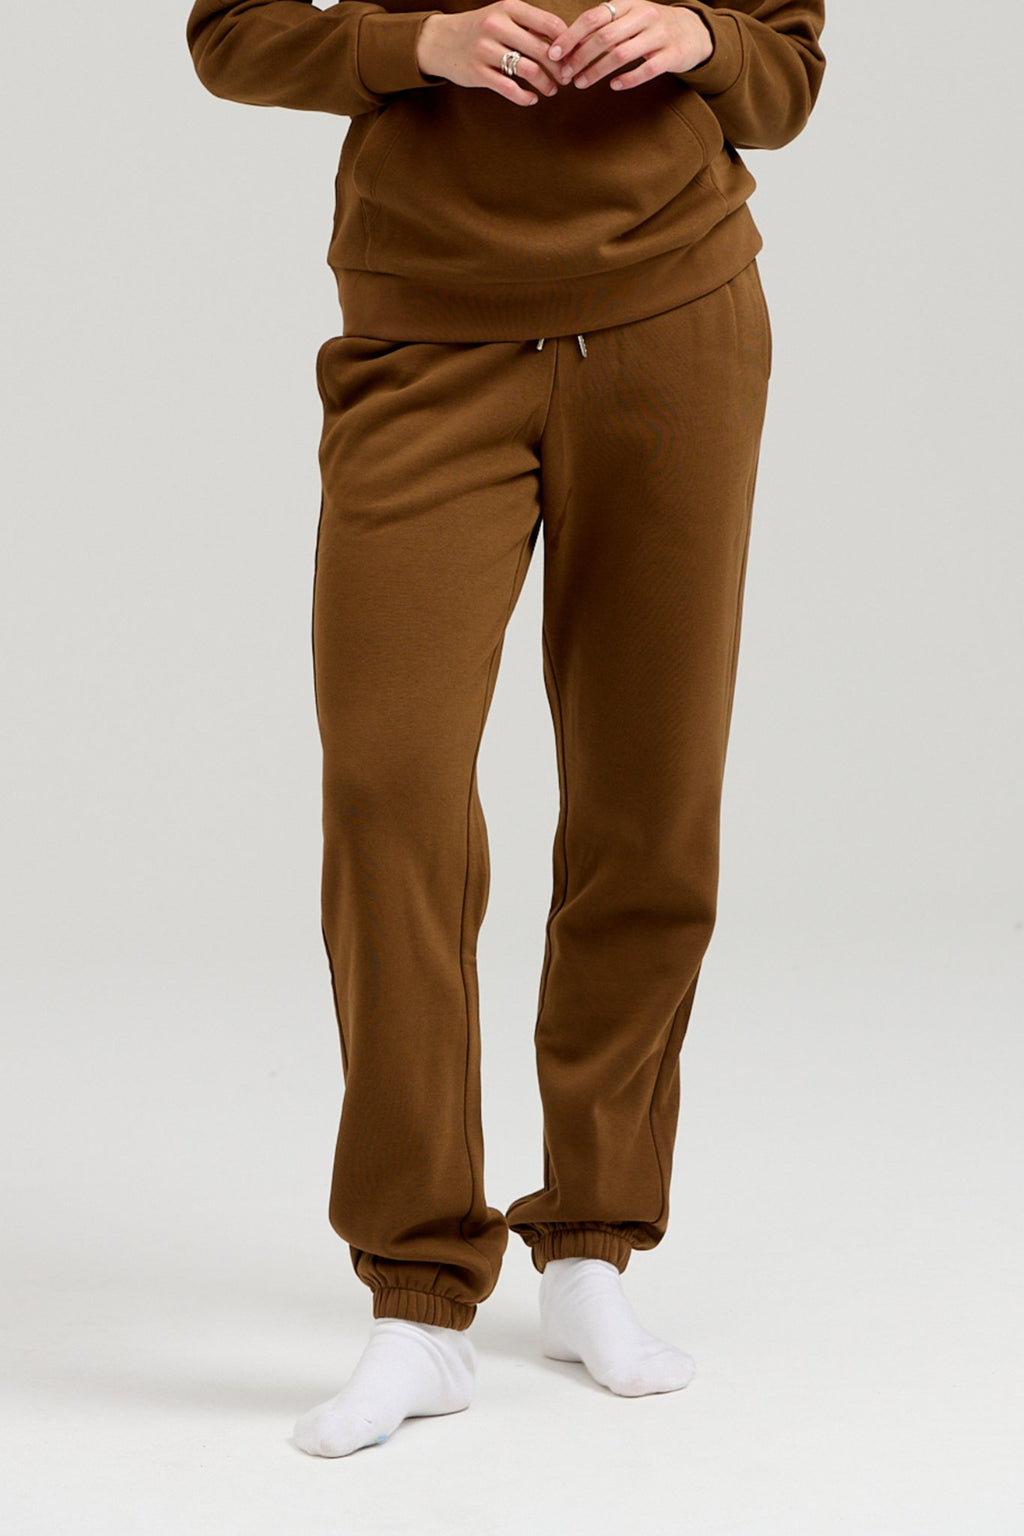 Basic SweatSuit with Soodie (Brown) - Paquete (mujeres)